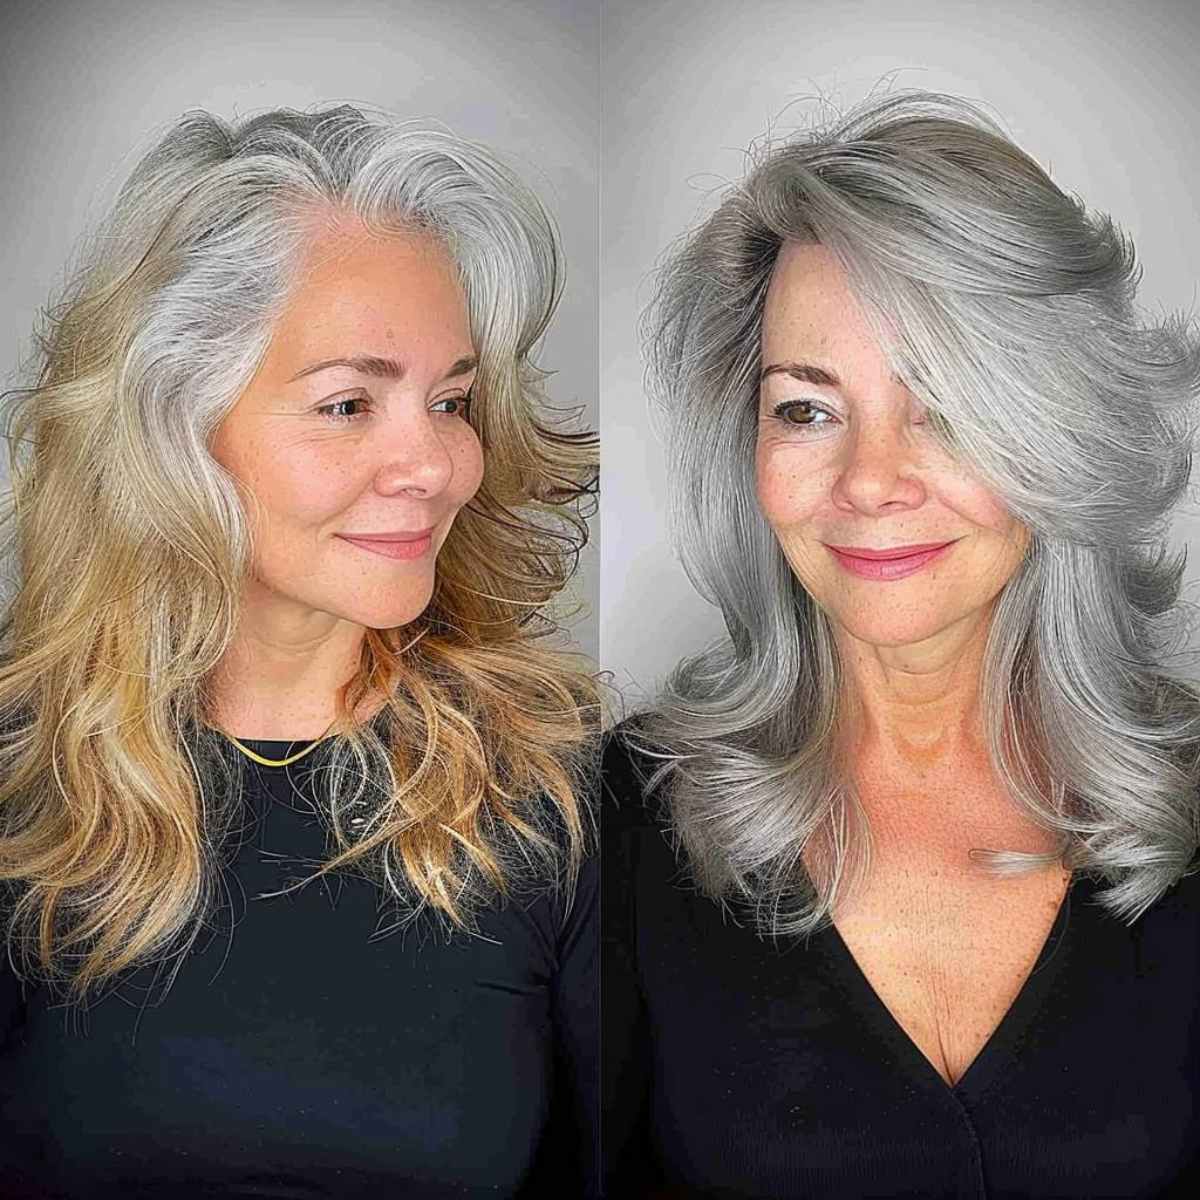 Silver blonde medium-length hair makeover showing before and after for a sophisticated woman over fifty